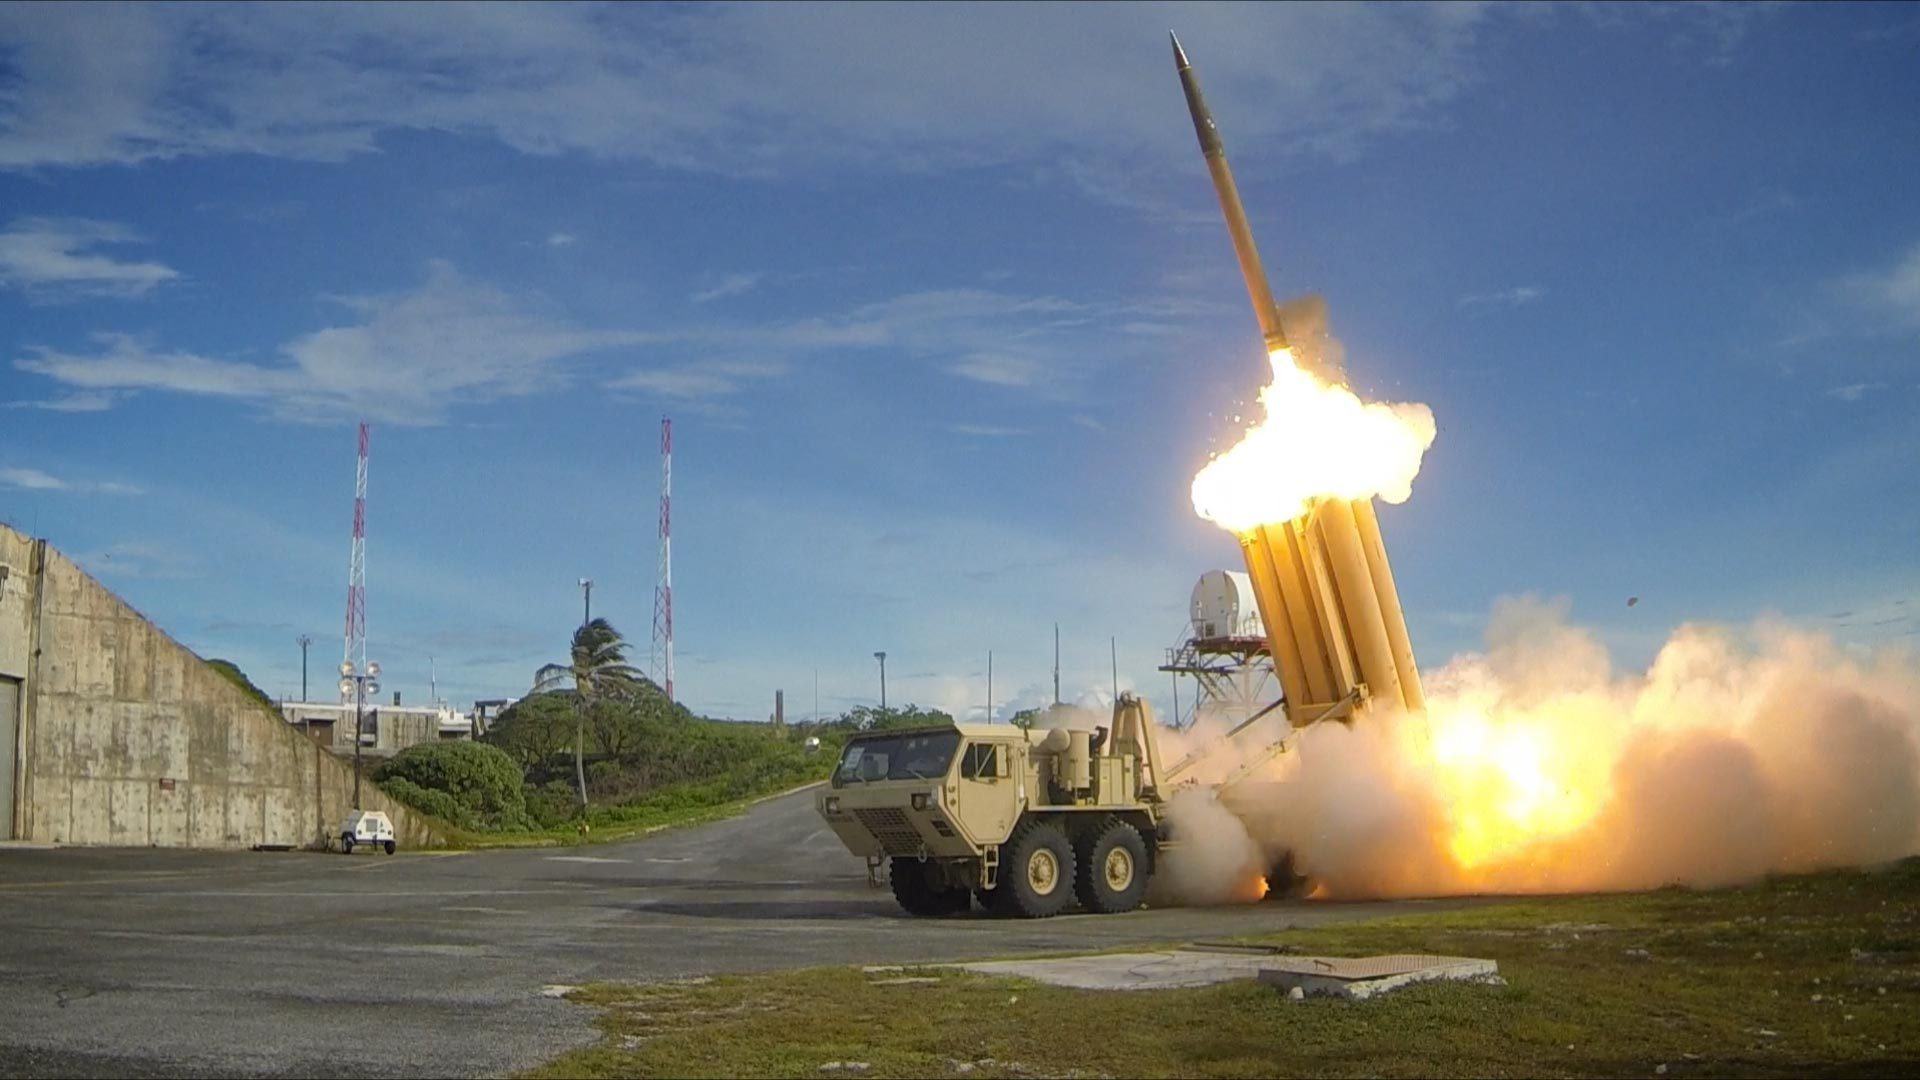 South Korea has allocated land to the United States for the THAAD missile defense system